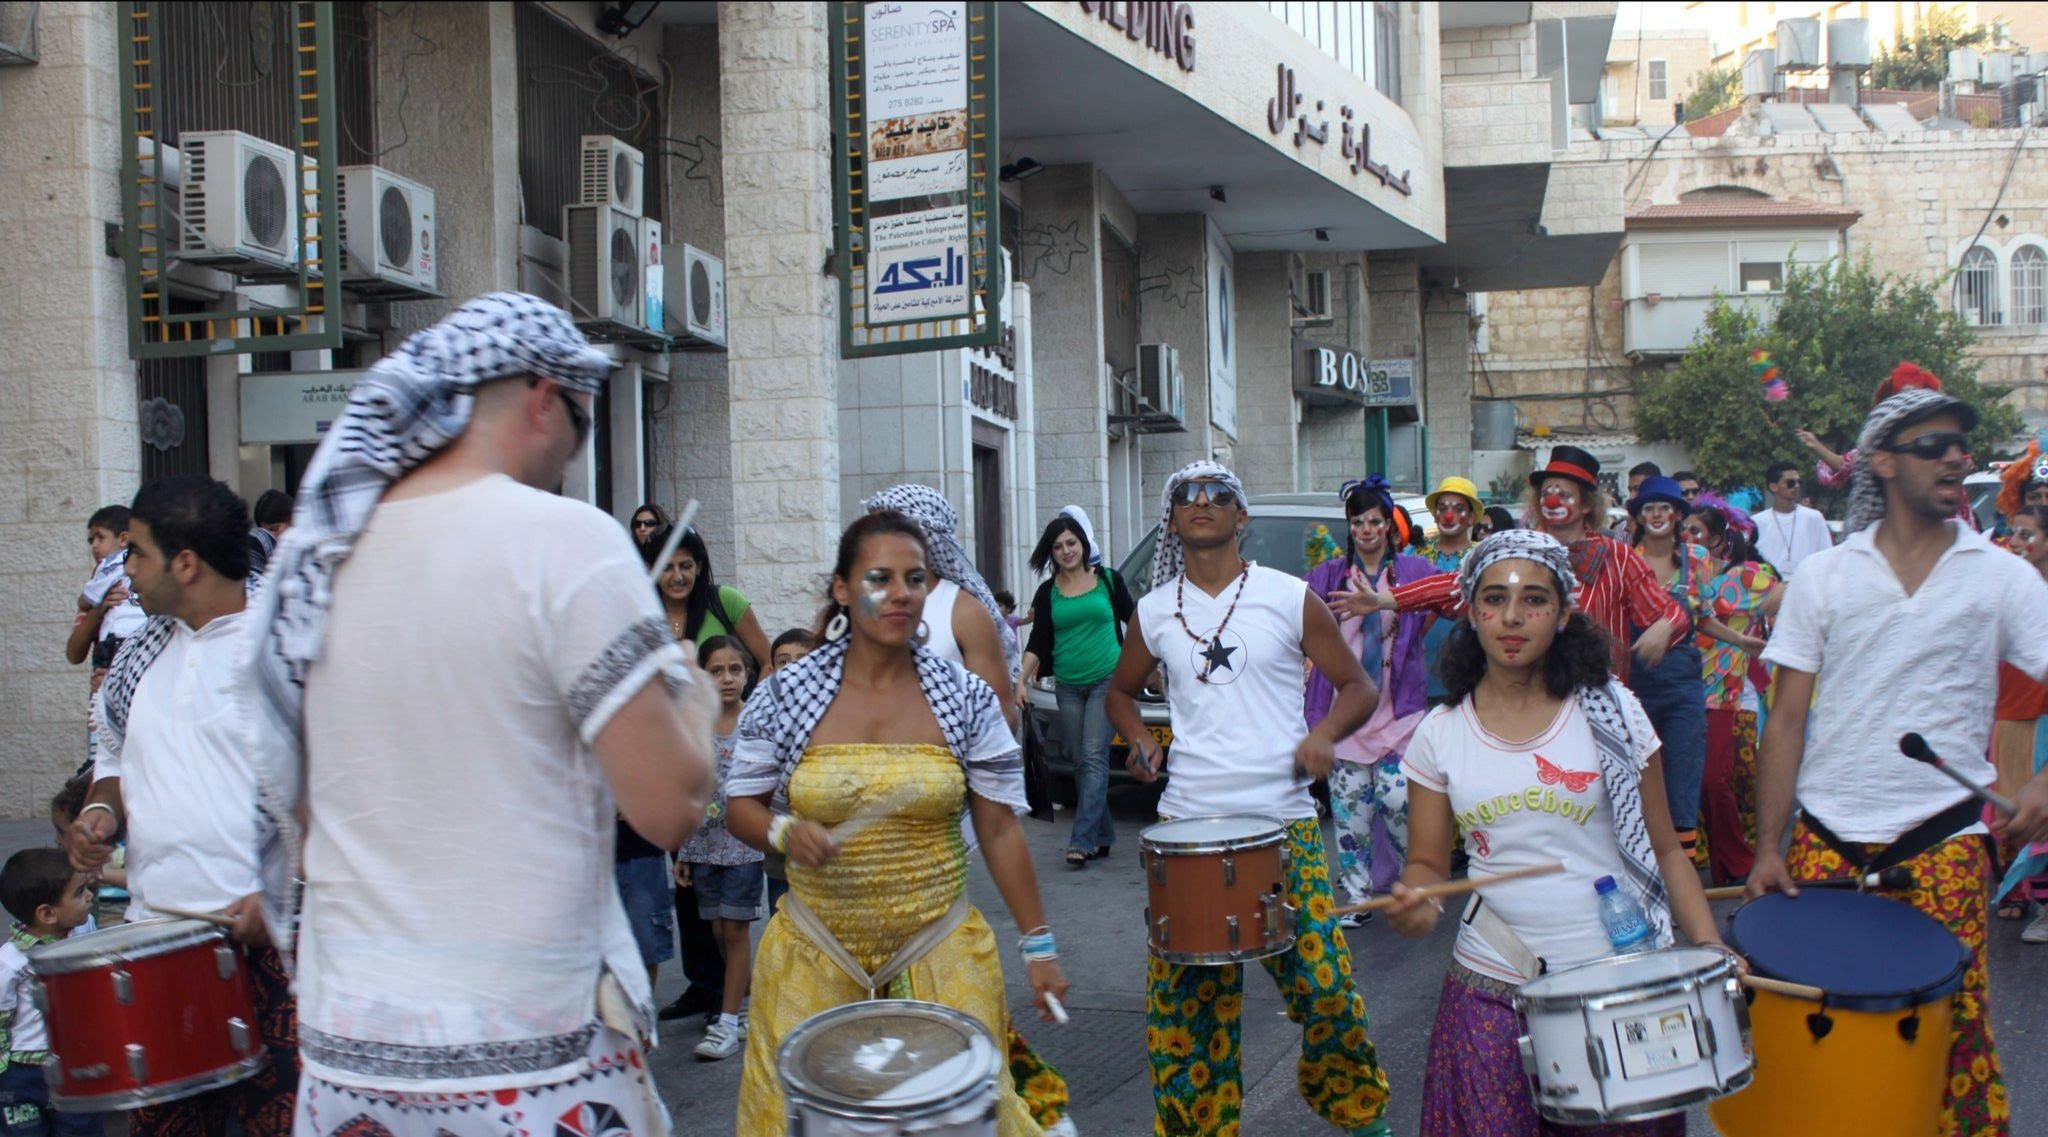 Katumba Founders Juliana and Ritchie in Palestine, where they worked with young refugees putting together their first street carnival.